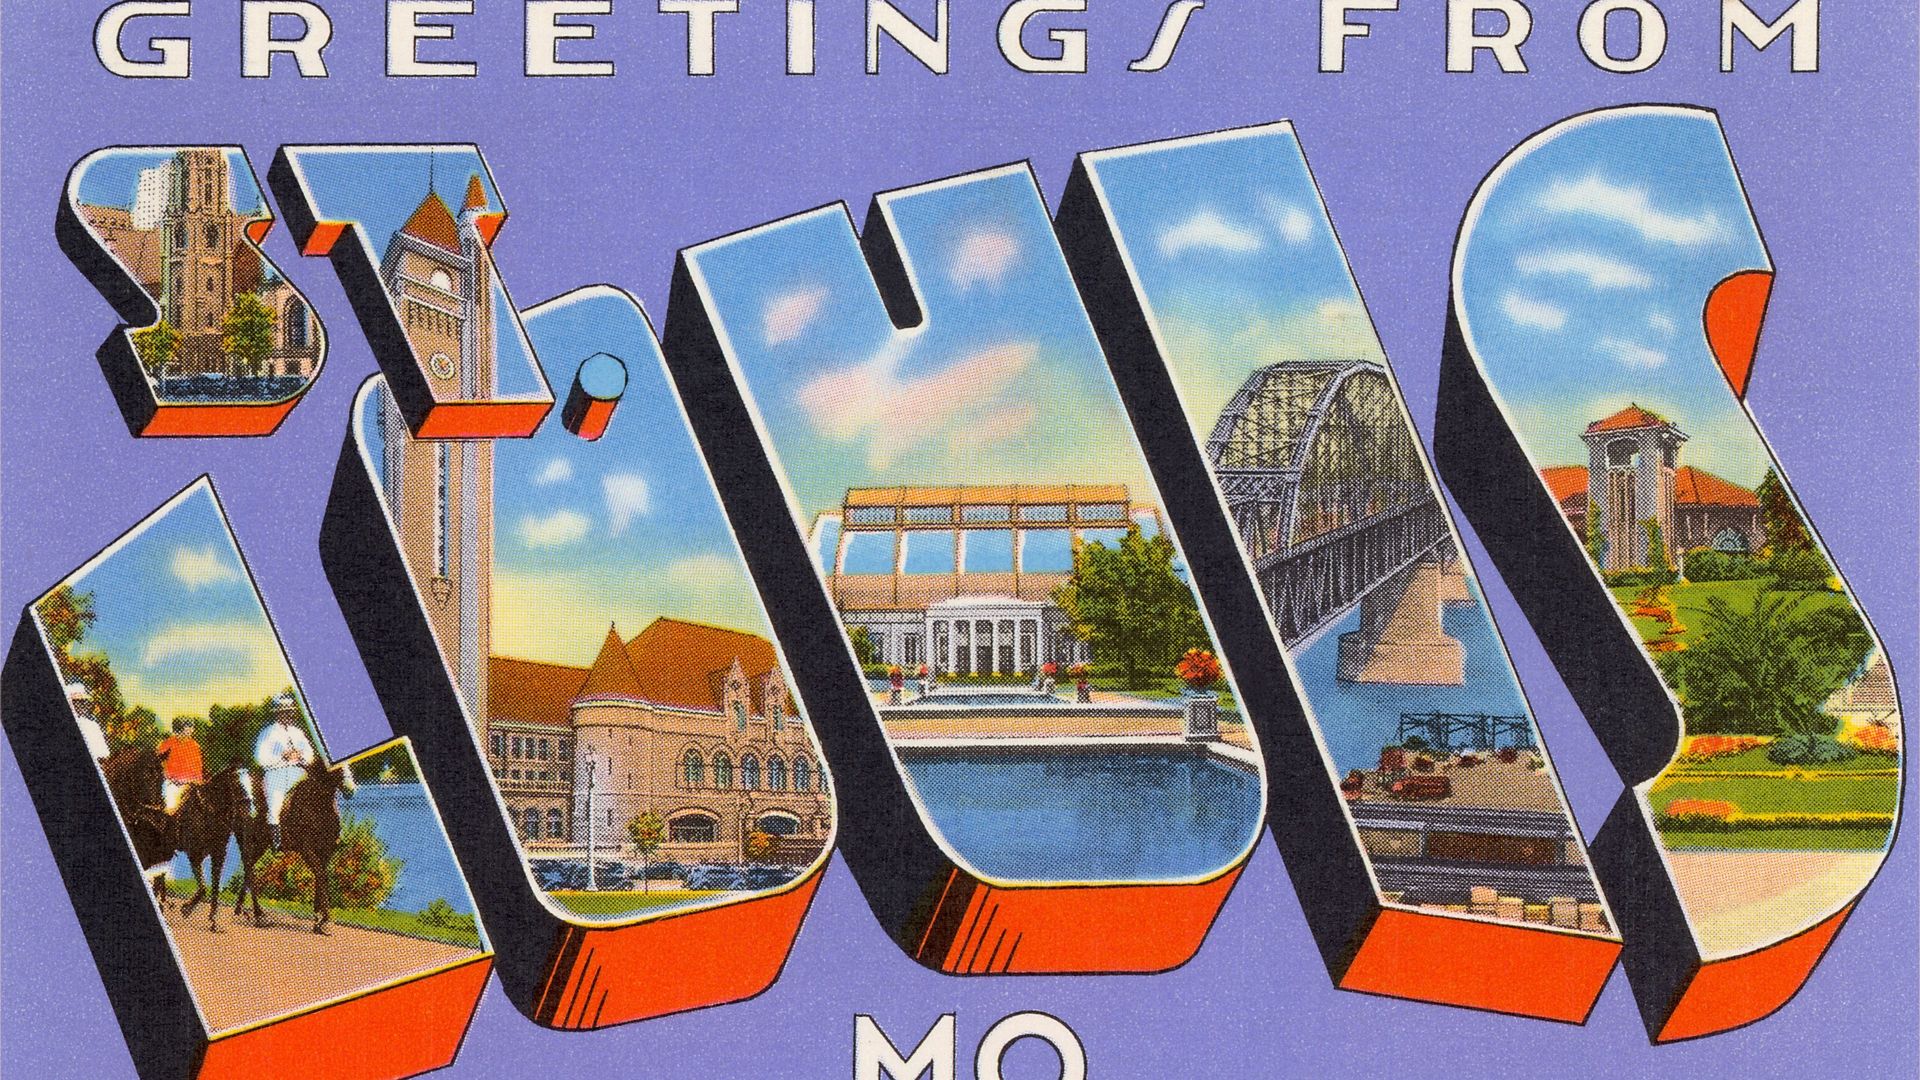 A greeting card from St. Louis